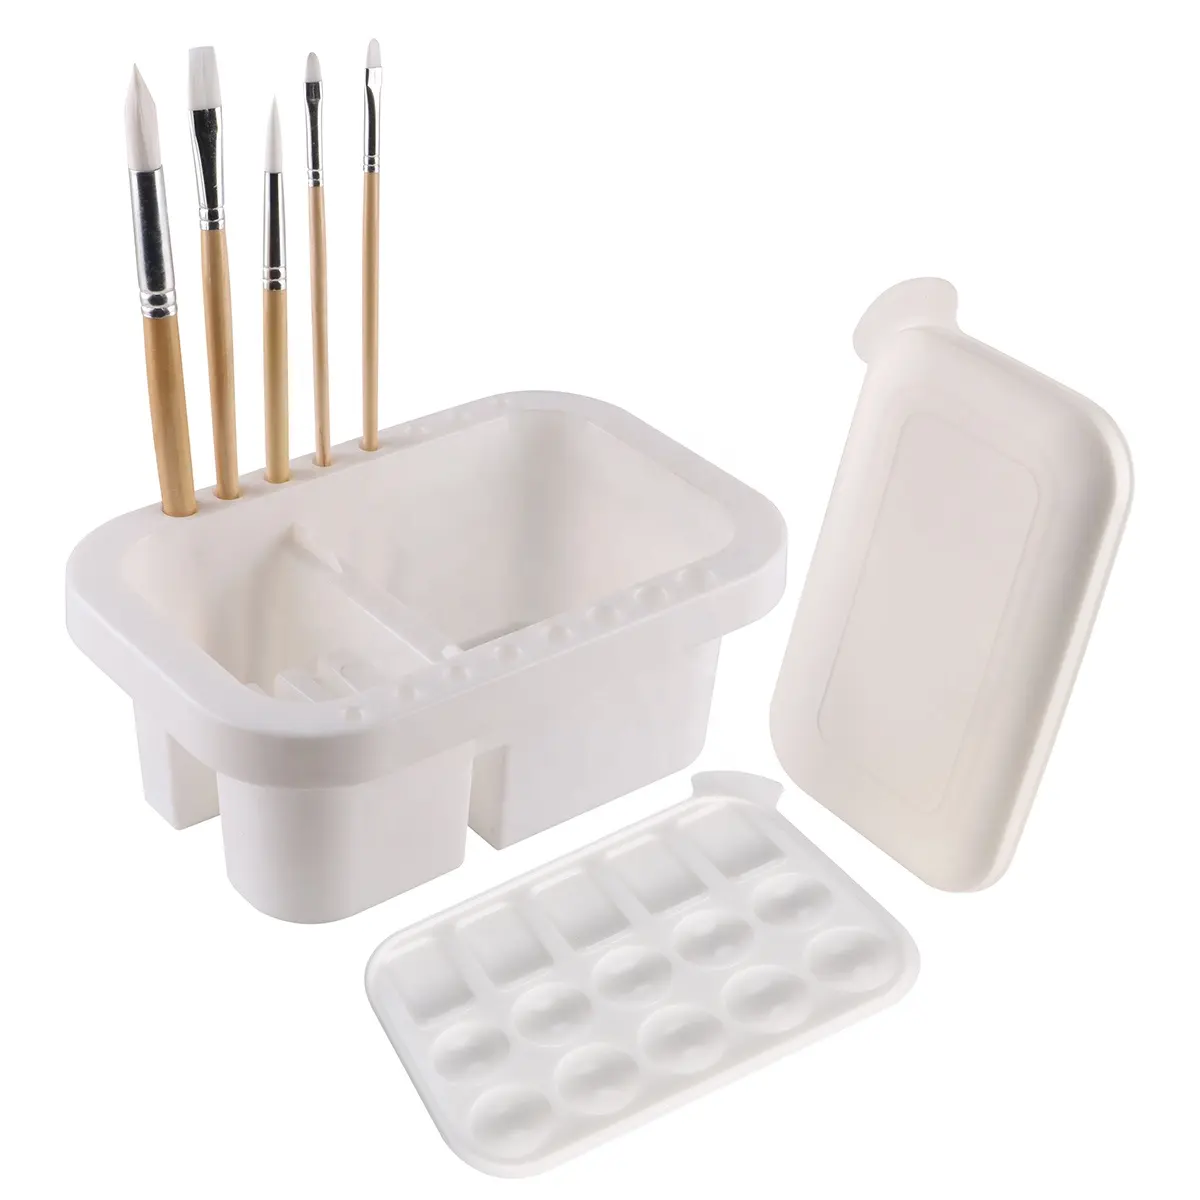 Multi-functional Art Accessories Portable Artist Painting Cleaning Plastic Brush Washer With A Palette And A Cover